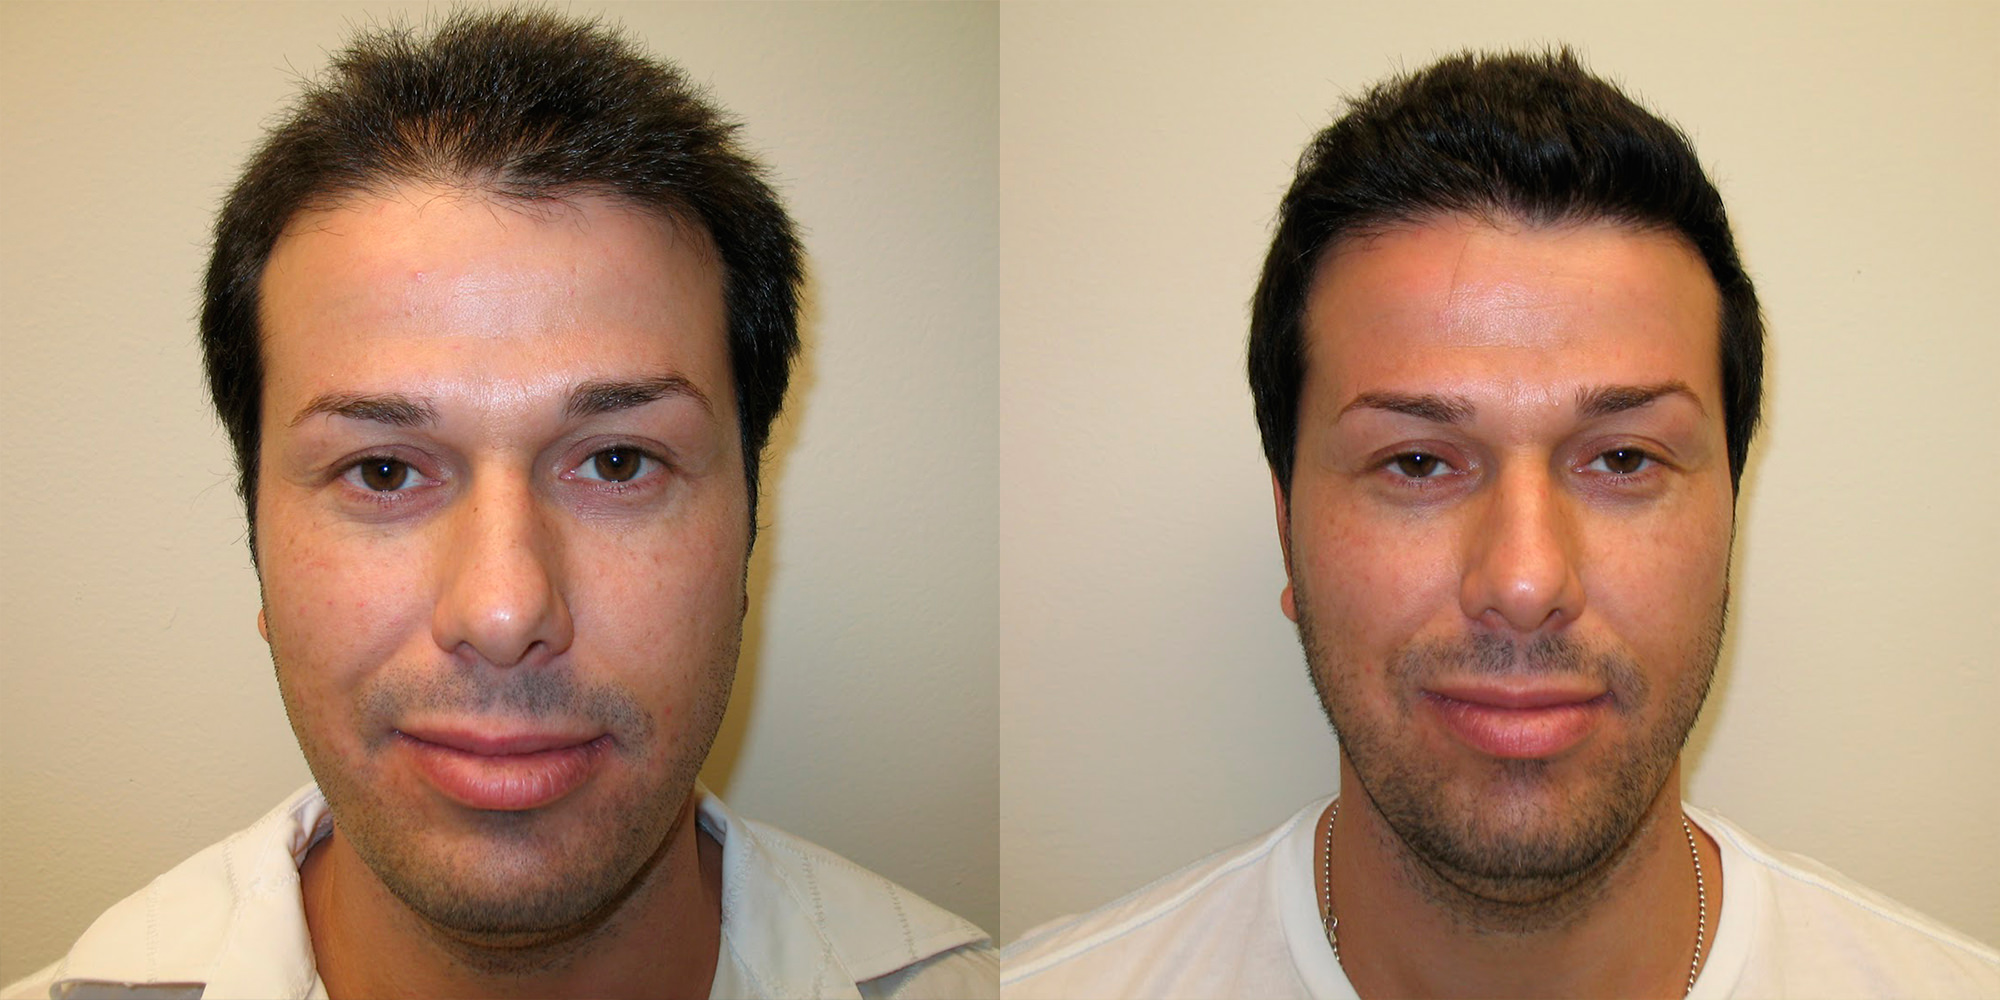 5 Years After Hair Transplant Follow-Up.